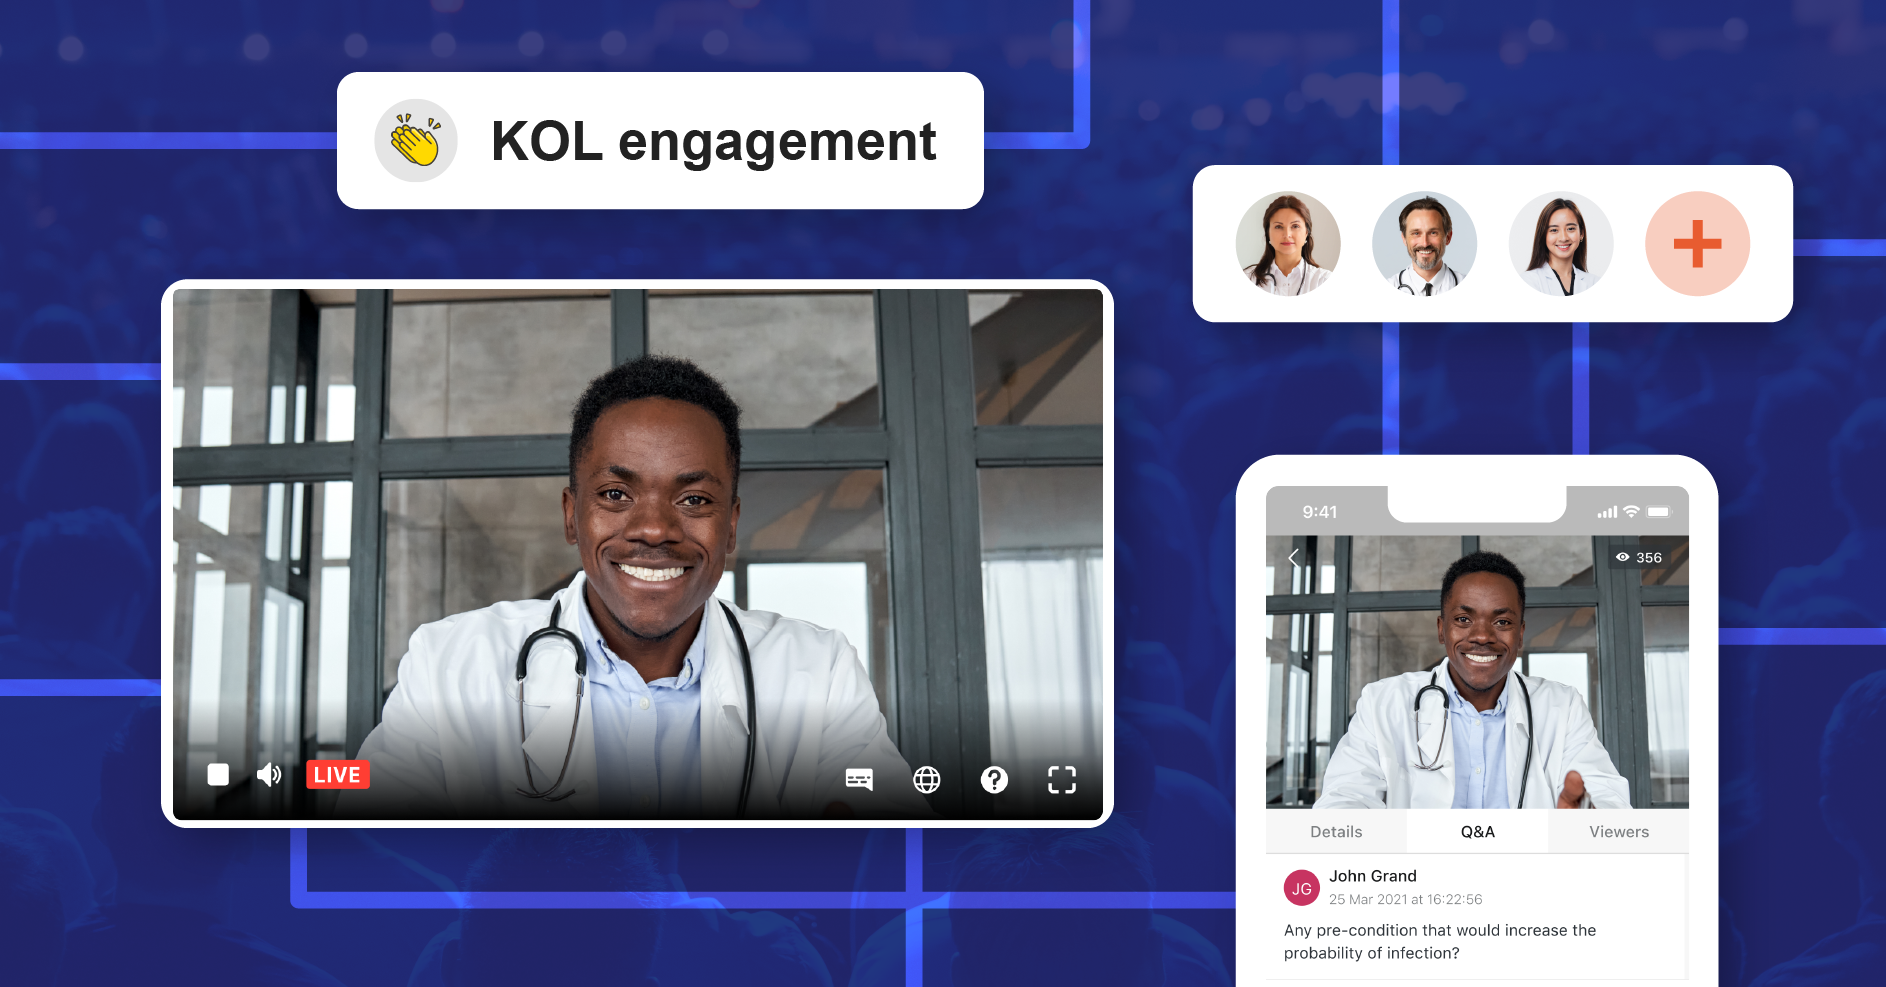 The ultimate KOL engagement plan for successful pharma events